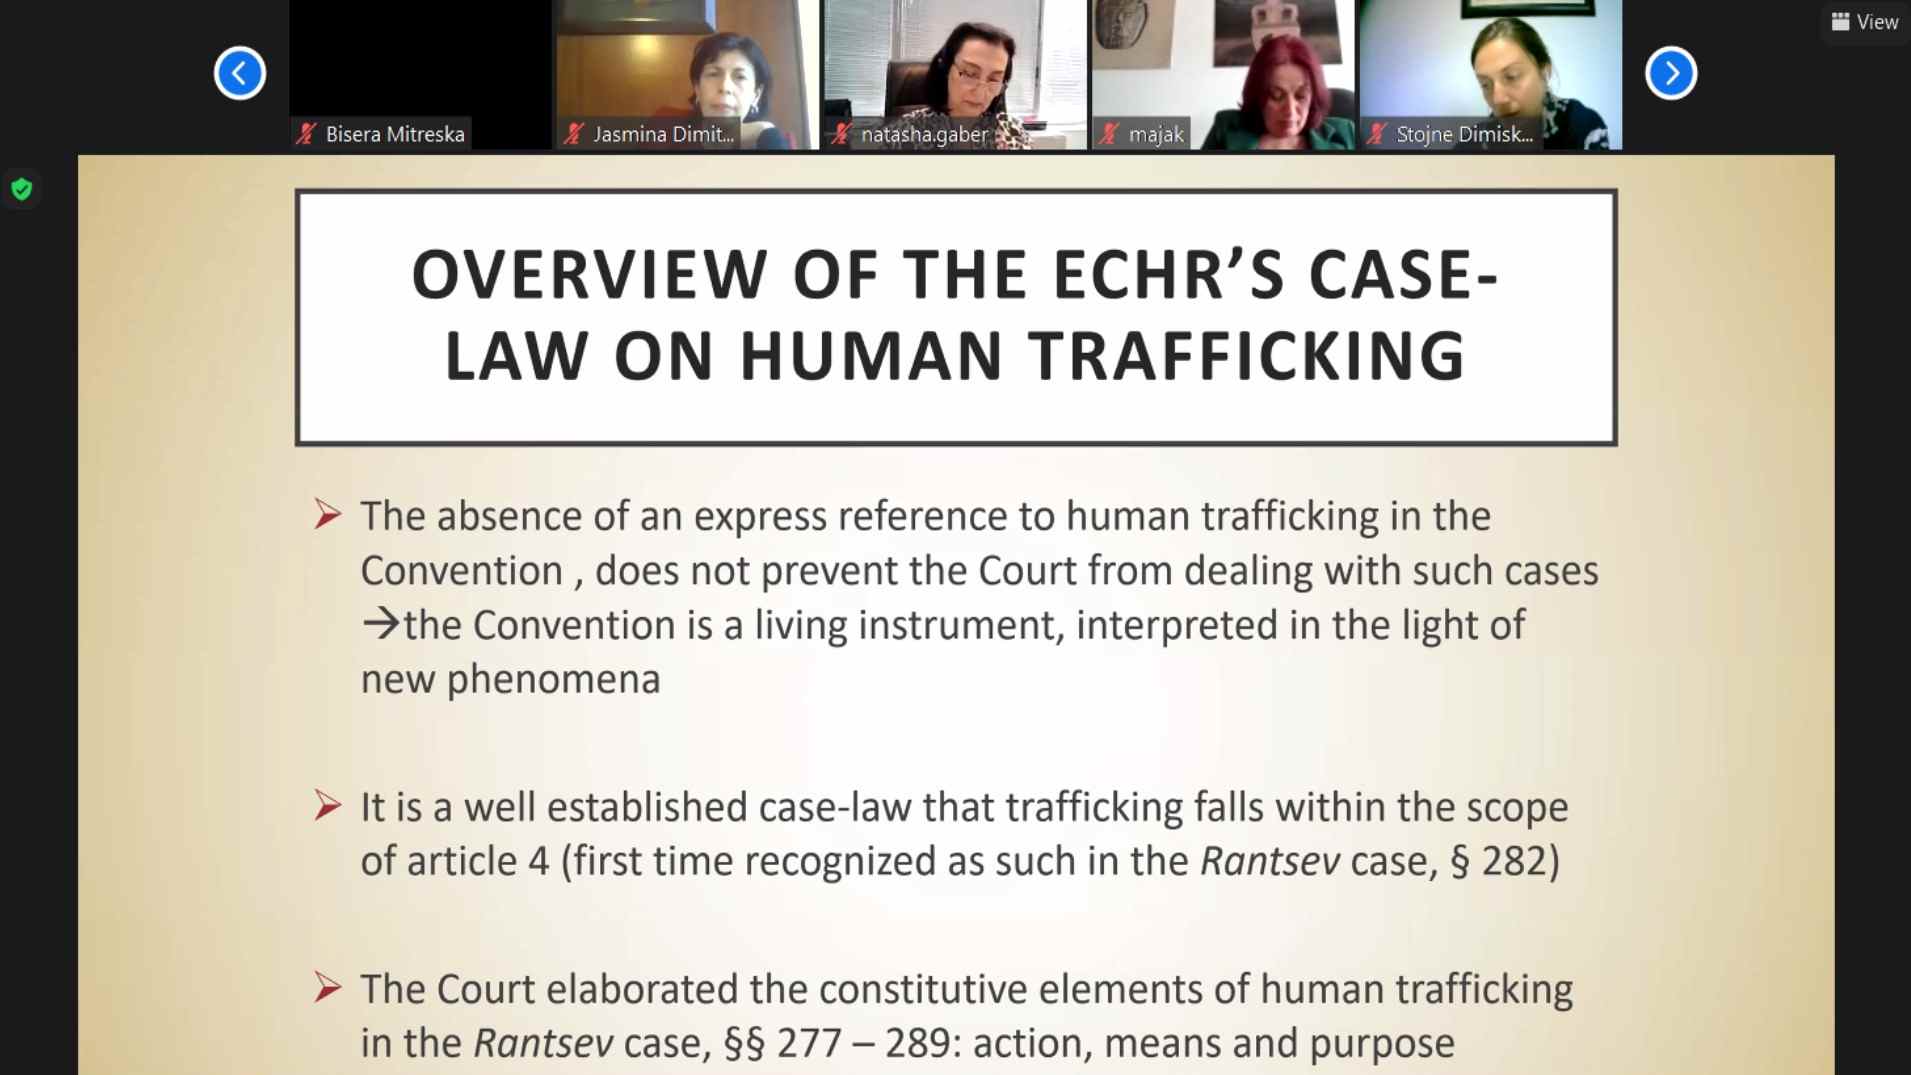 Webinar on the Council of Europe anti-trafficking standards delivered to legal professionals in North Macedonia